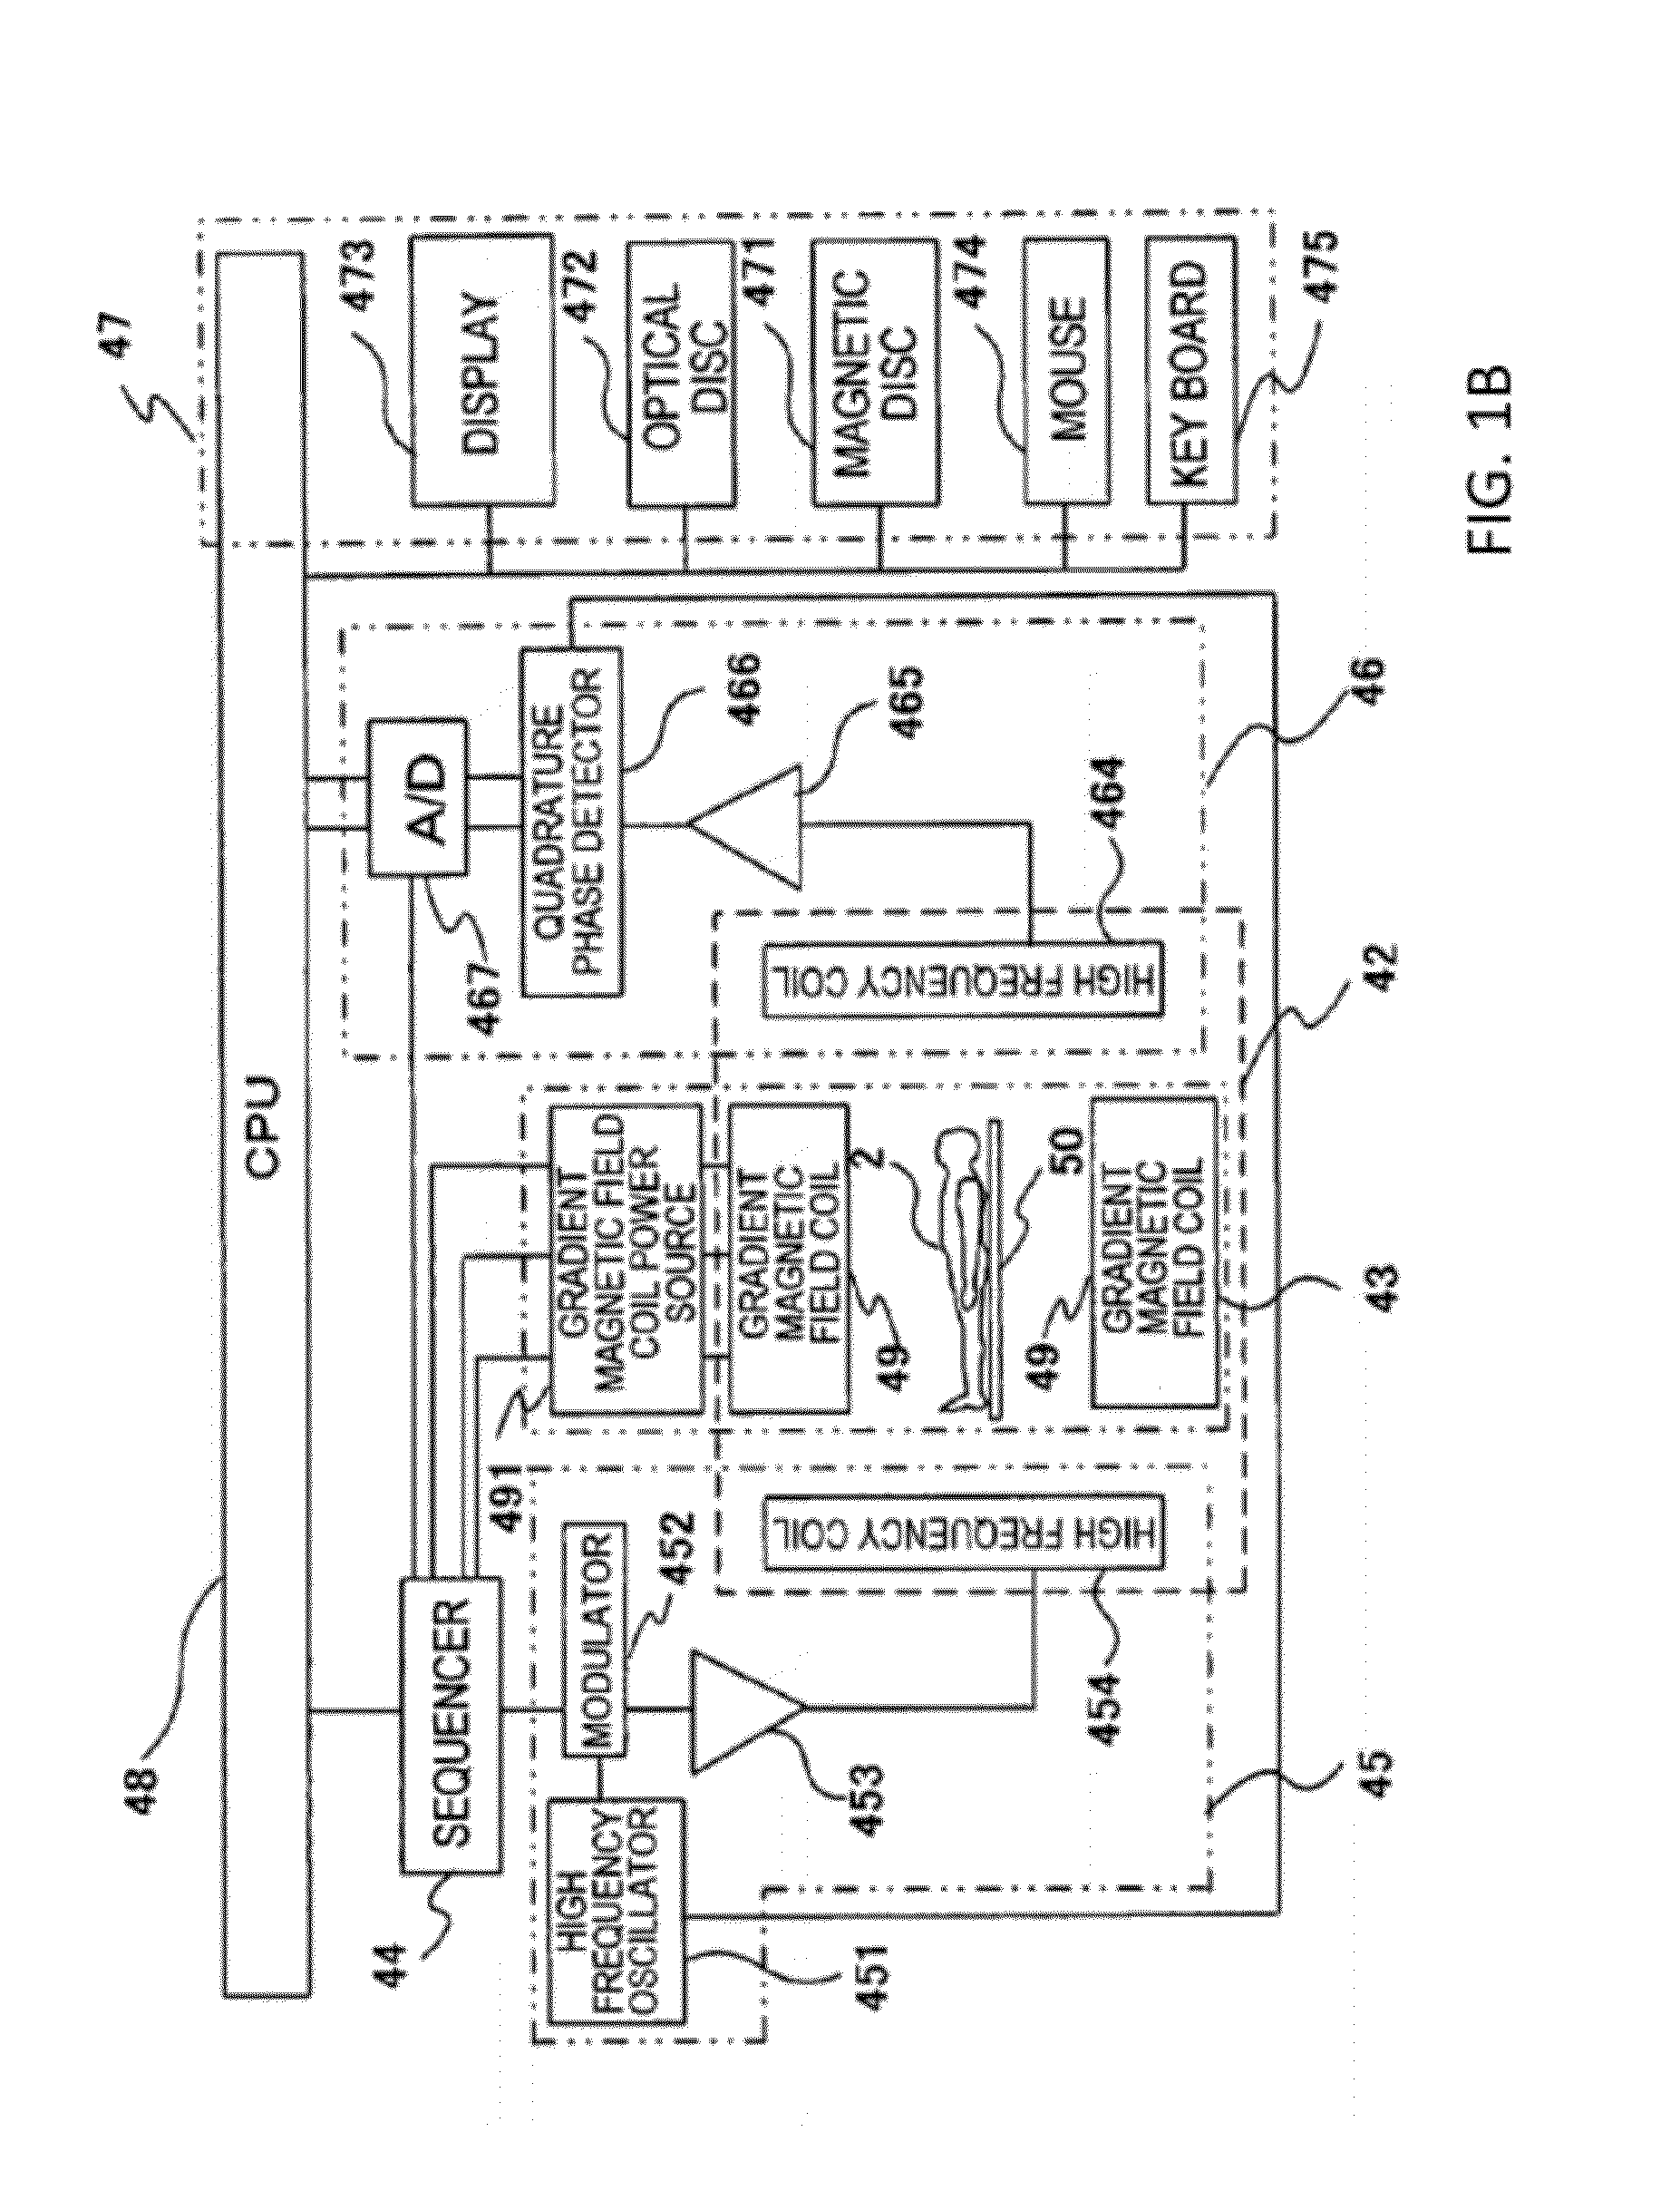 System and method for determining mechanical properties of bone structures